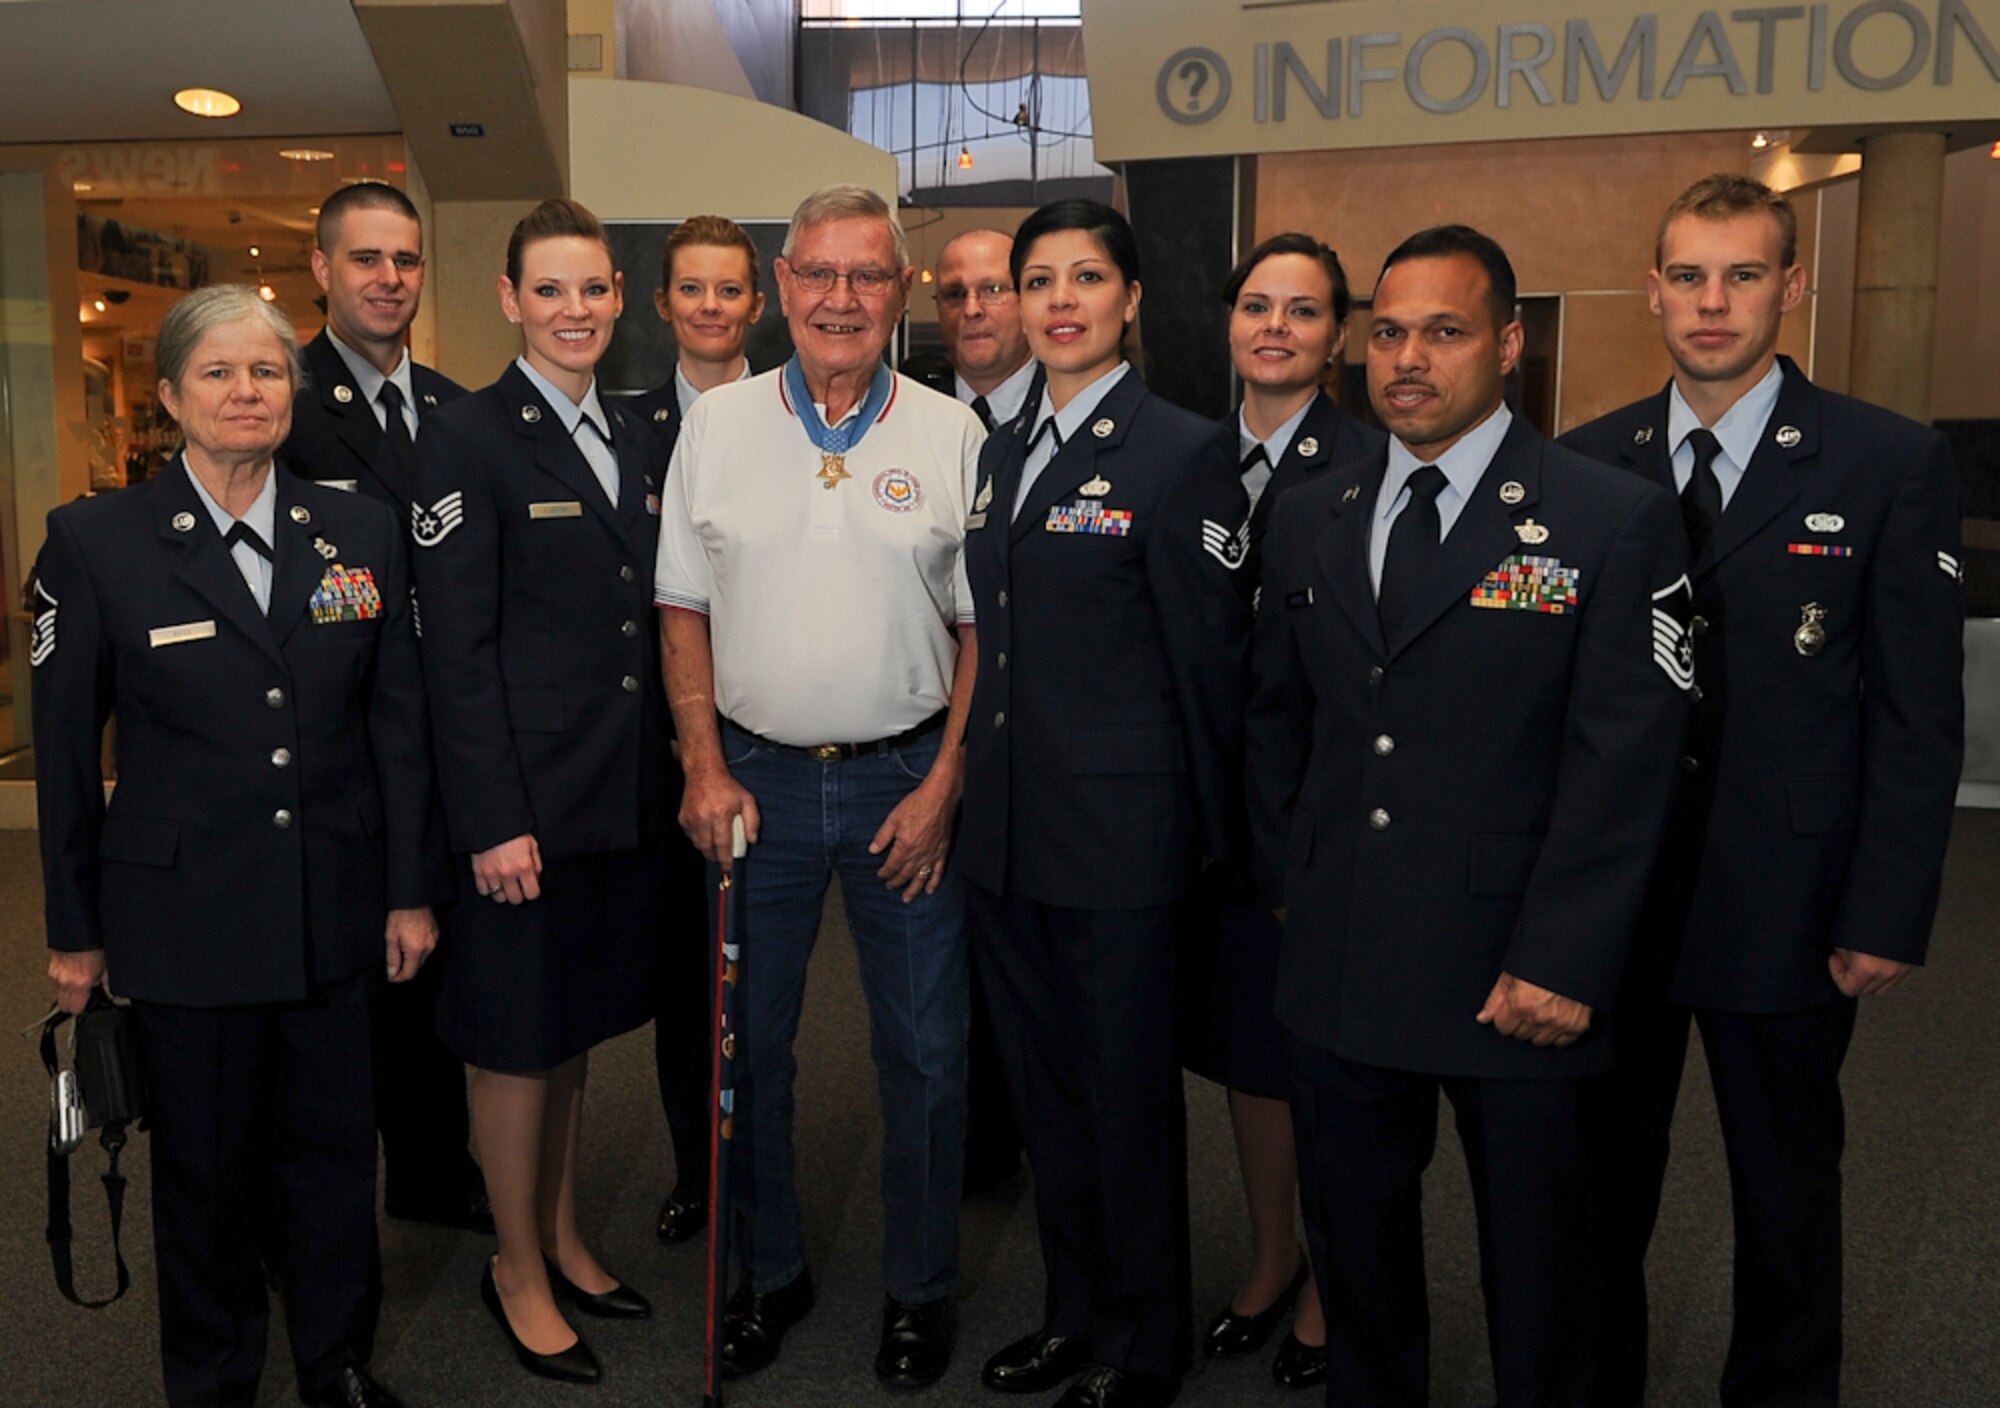 Medal of Honor recipient Retired Cpl. Duane E. Dewey, USMC, Korean War, poses with the members of the 136th Airlift Wing, Texas Air National Guard at DFW Airport where eight MOH recipients and one representative for the Late John Finn, WWII MOH  arrived April 5, 2011 for the annual Gainesville MOH Parade. The parade will be held April 9, honoring our Nation's highest decorated military heroes. (U.S. Air Force photo by Senior Master Sgt. Elizabeth Gilbert/released)